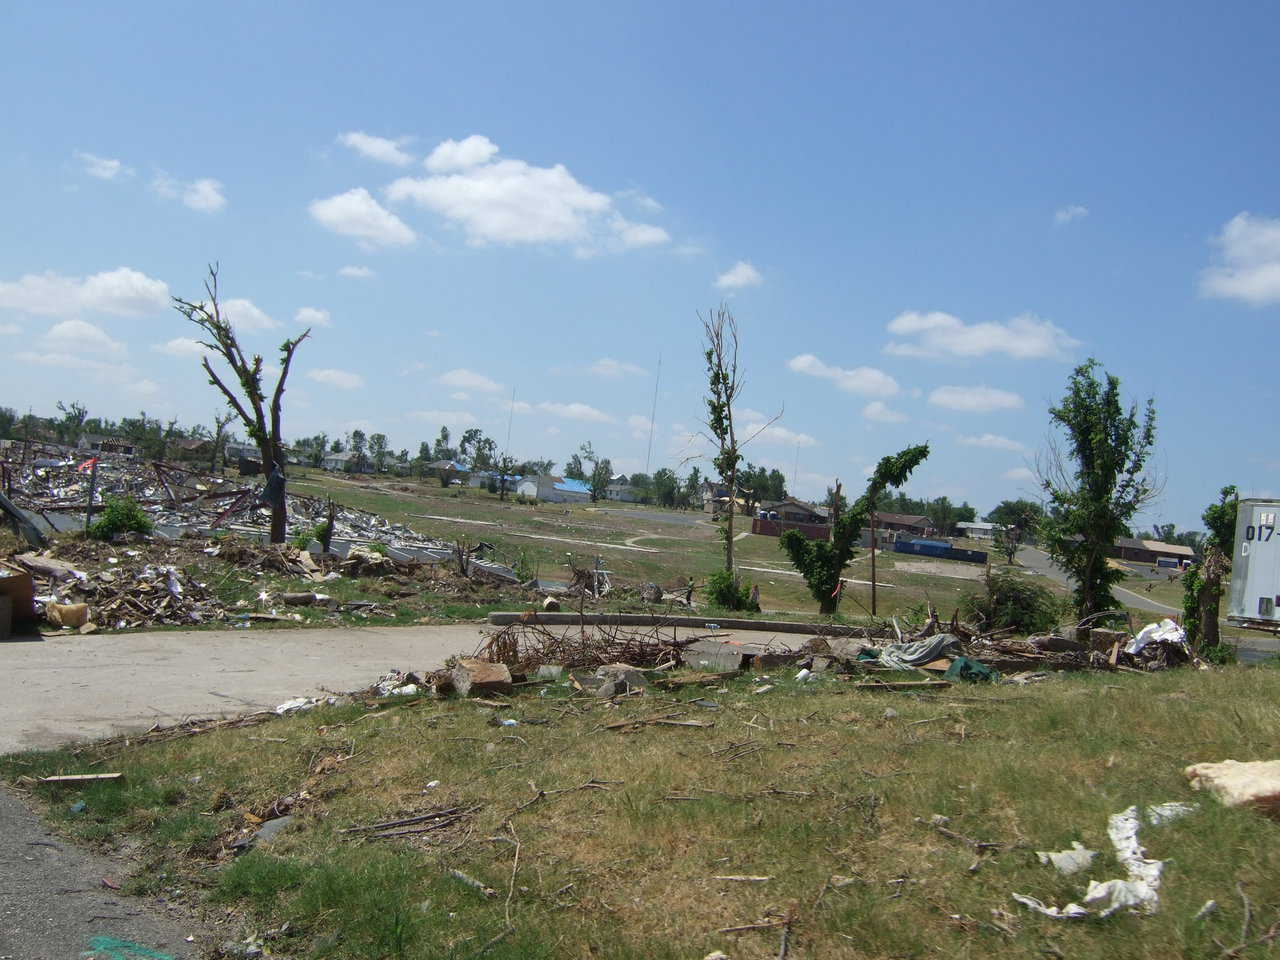 The tornado easily uprooted most of the trees.